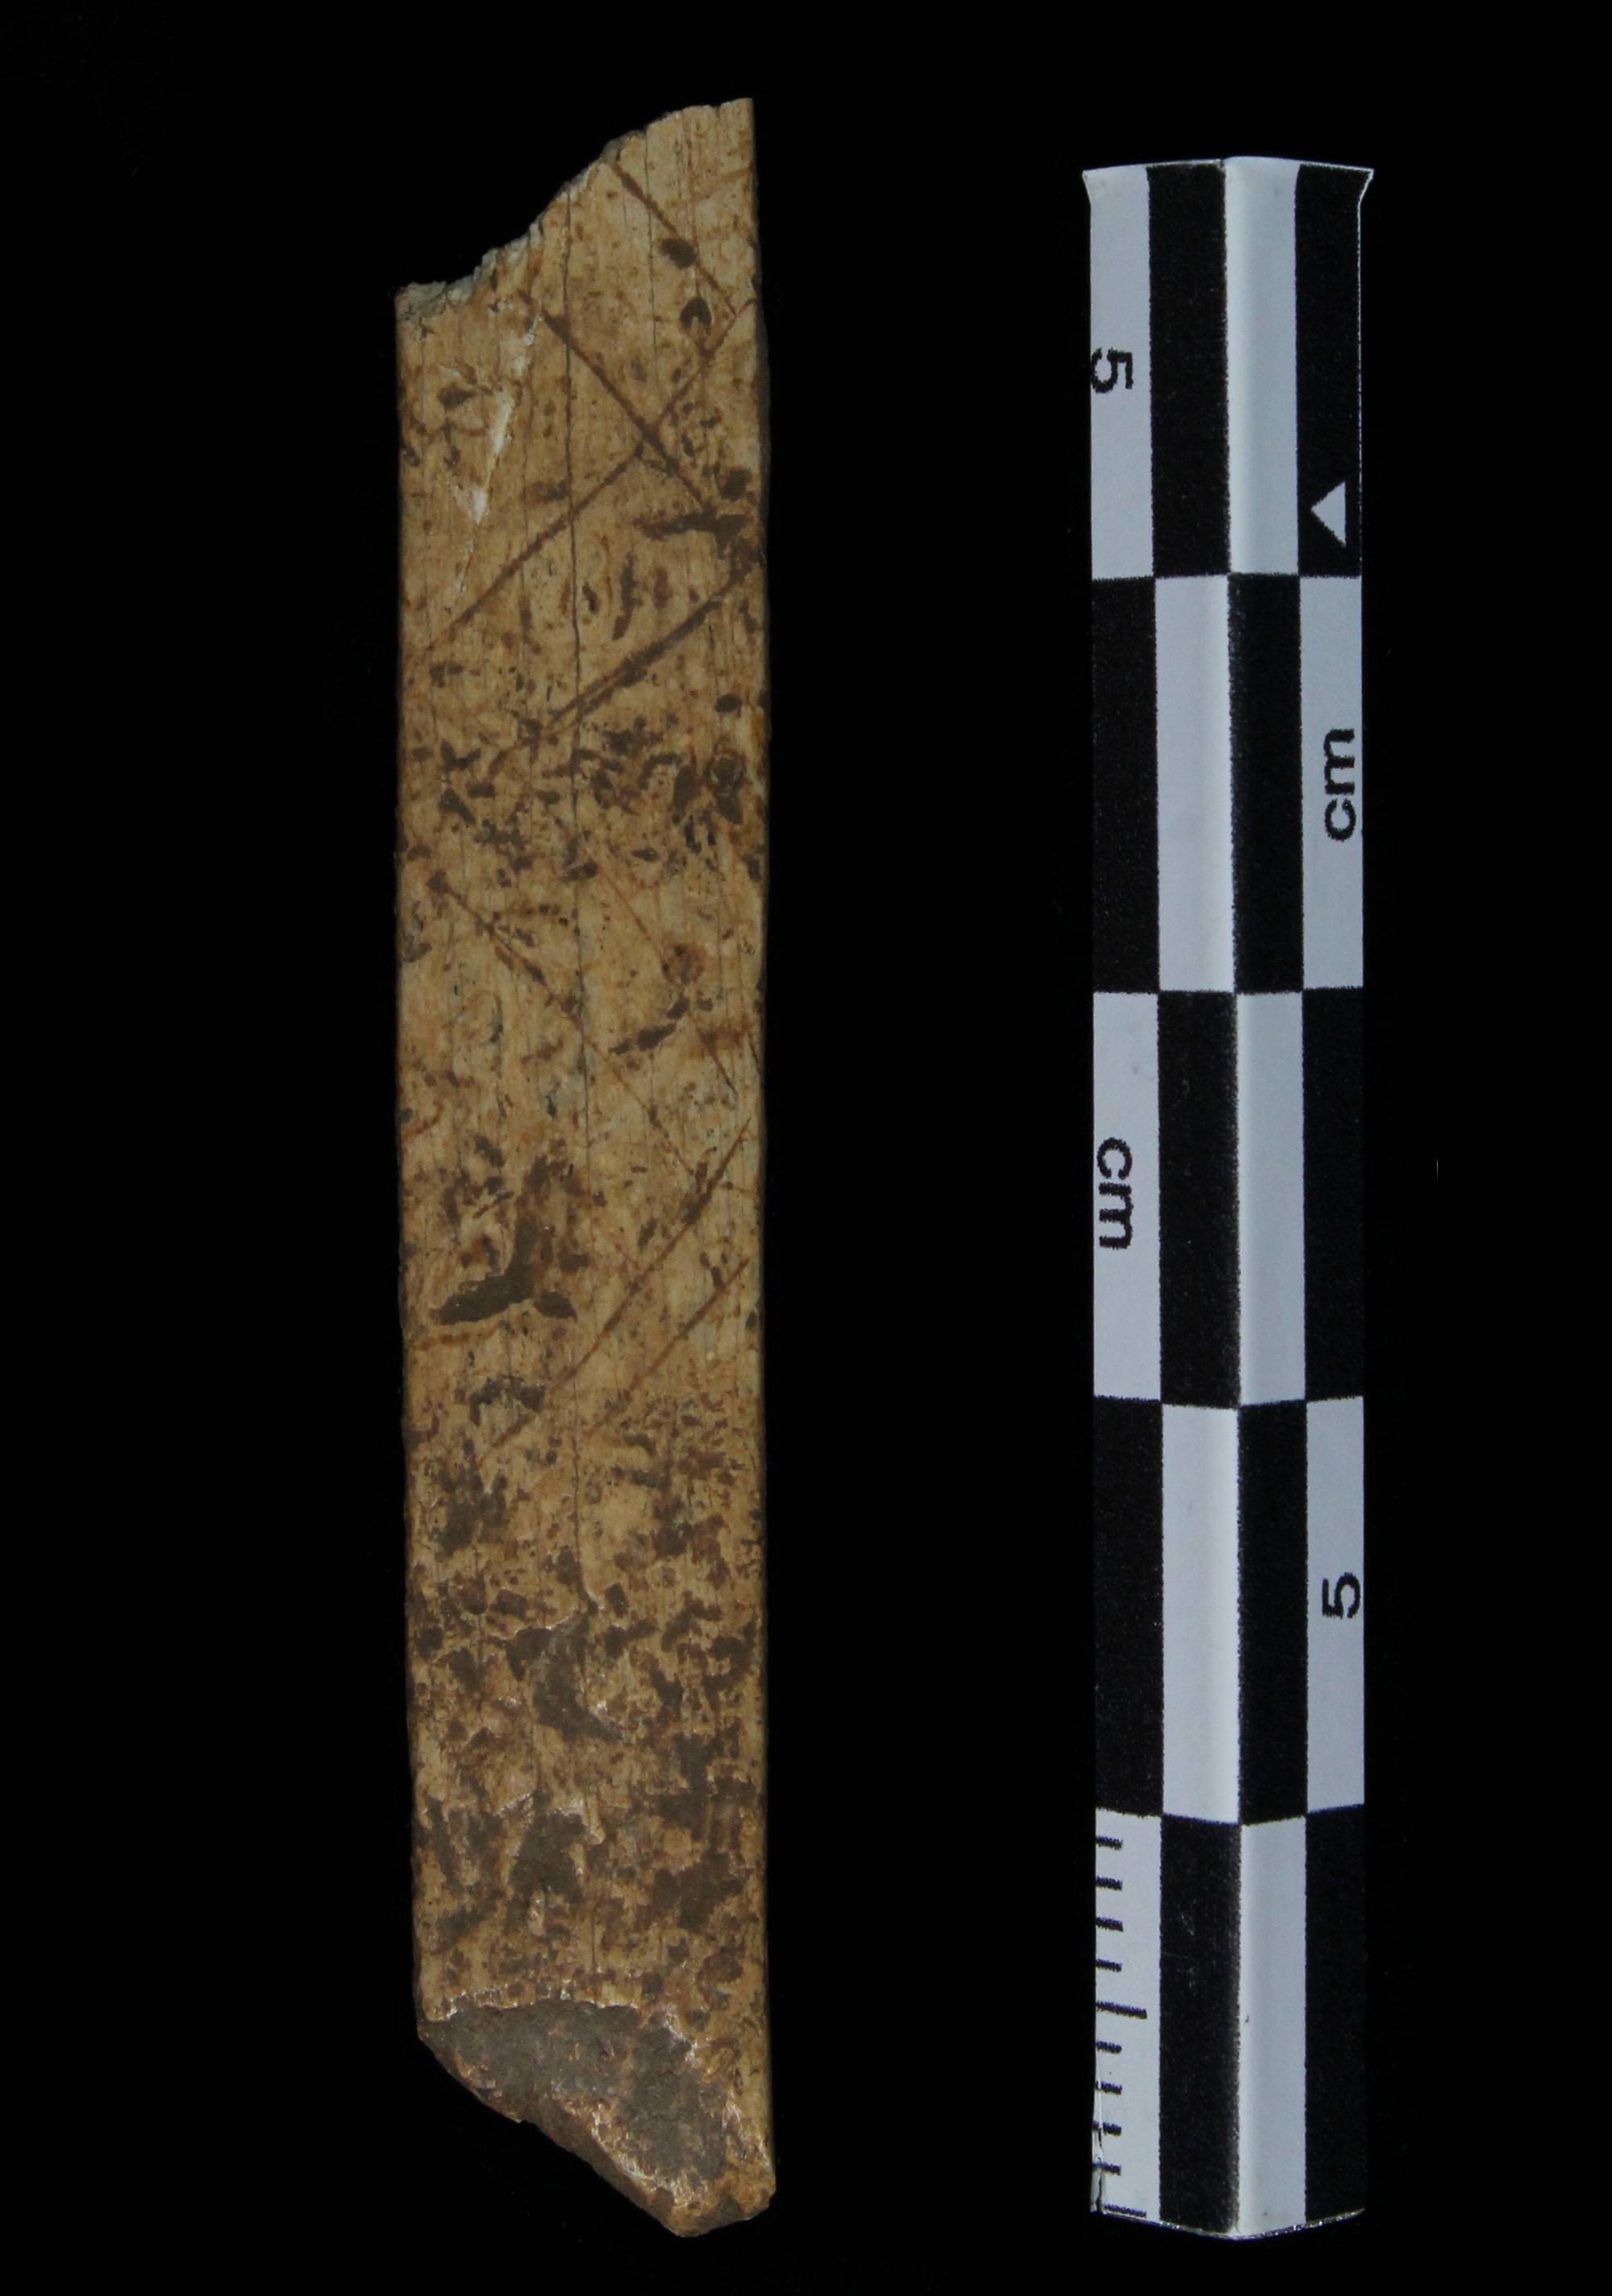 Photo of incised bone fragment from 2014 Spring Lake Data Recovery